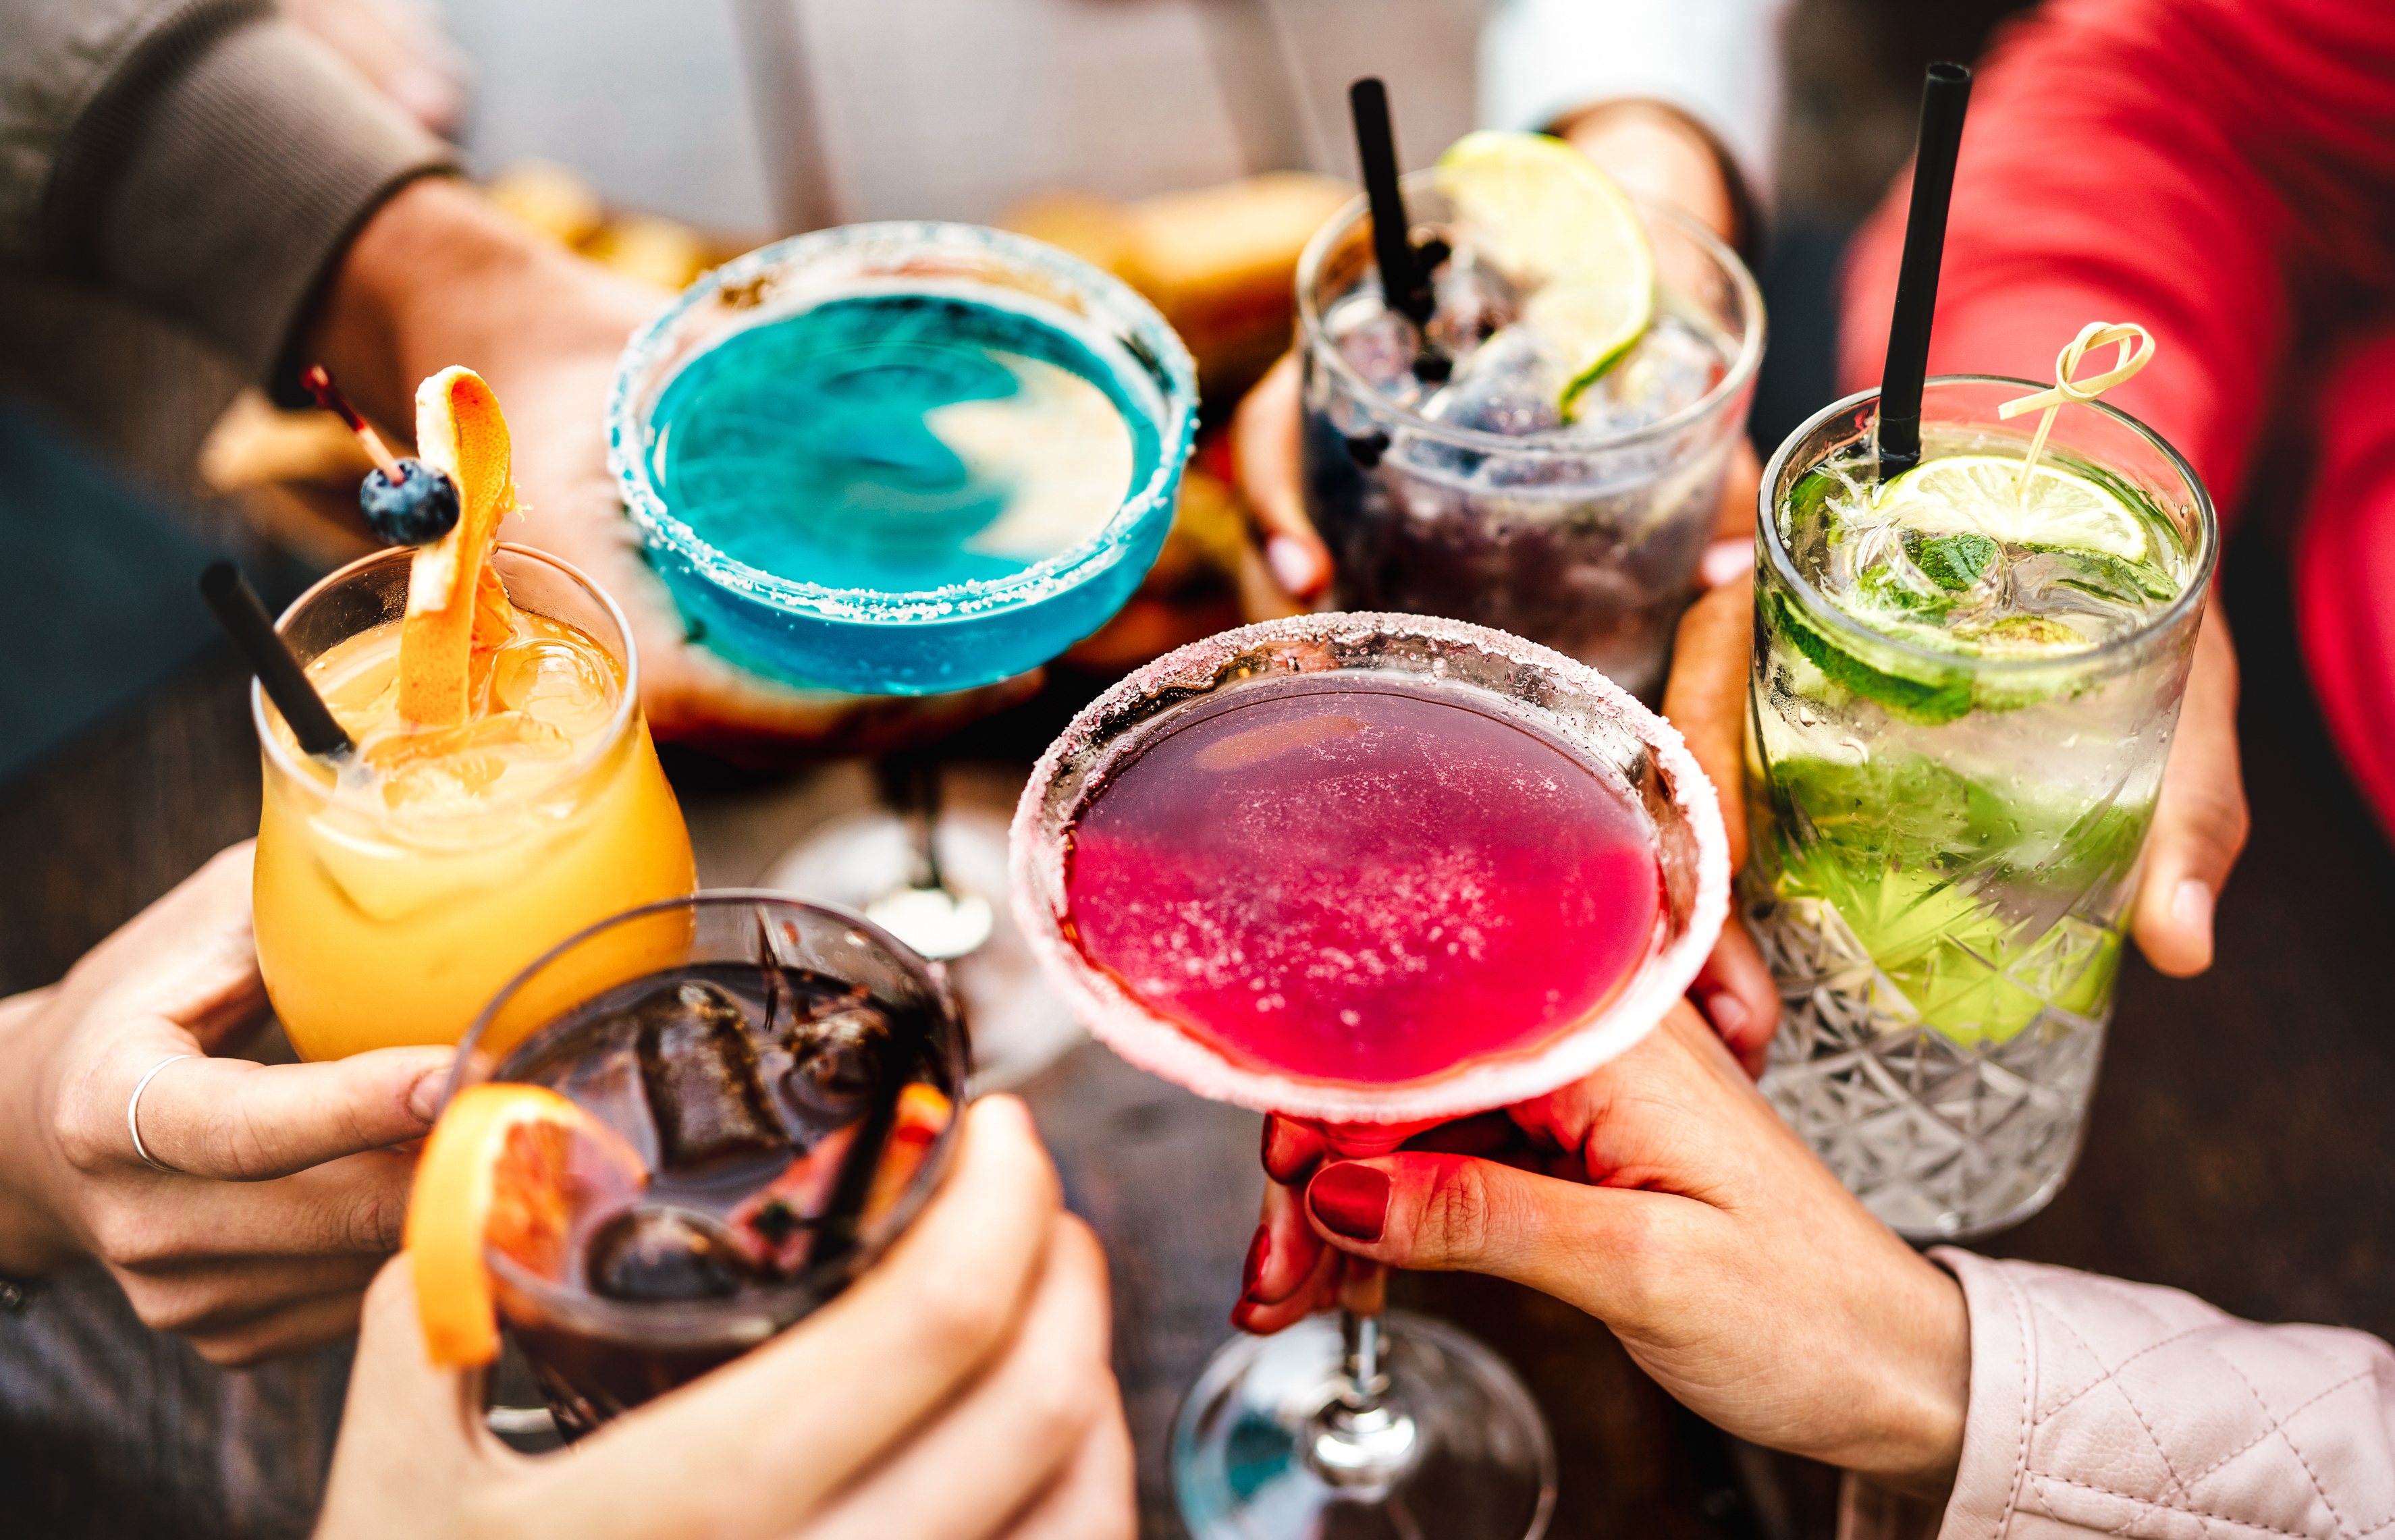 Hotels expand drink options for growing number of sober guests | Restaurant  Hospitality